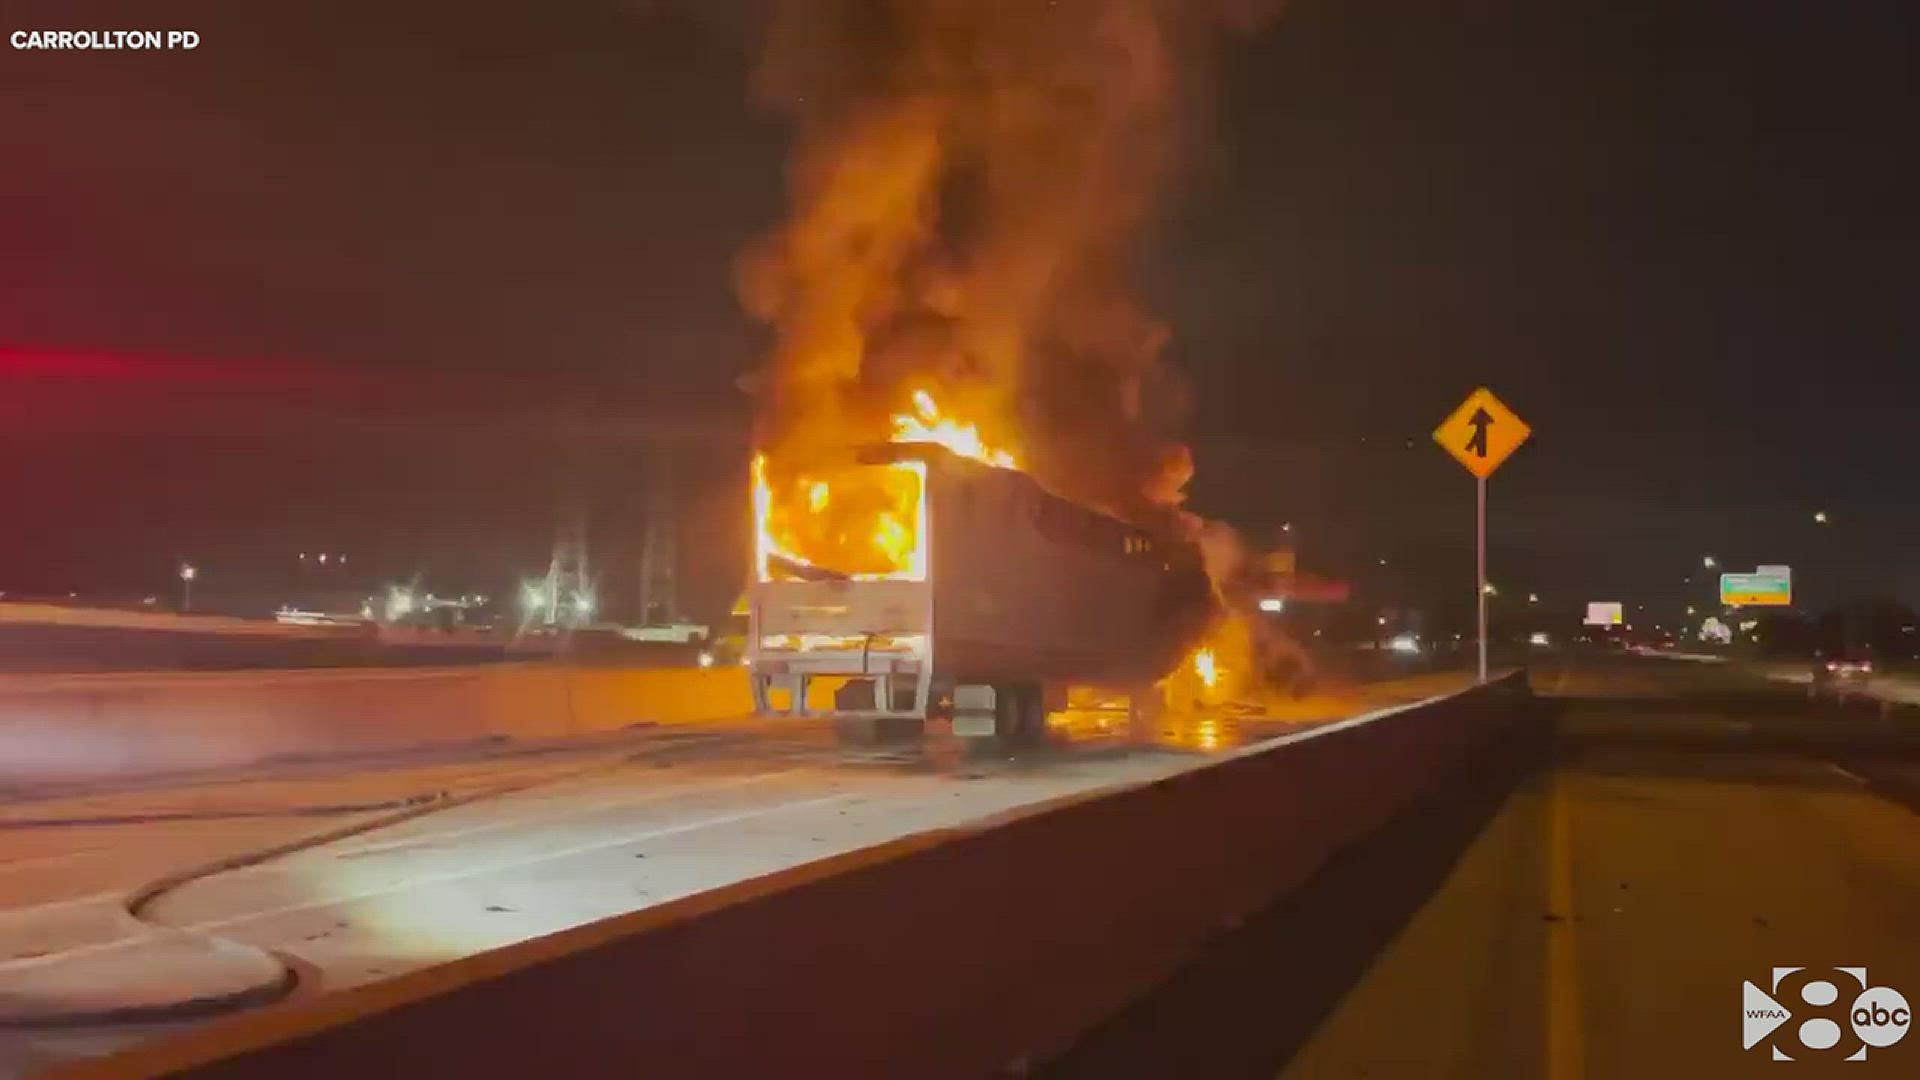 Carrollton police shared this video of a truck fire on the I-35 Express Lane. The crash shut down the Express Lane for several hours Monday morning.